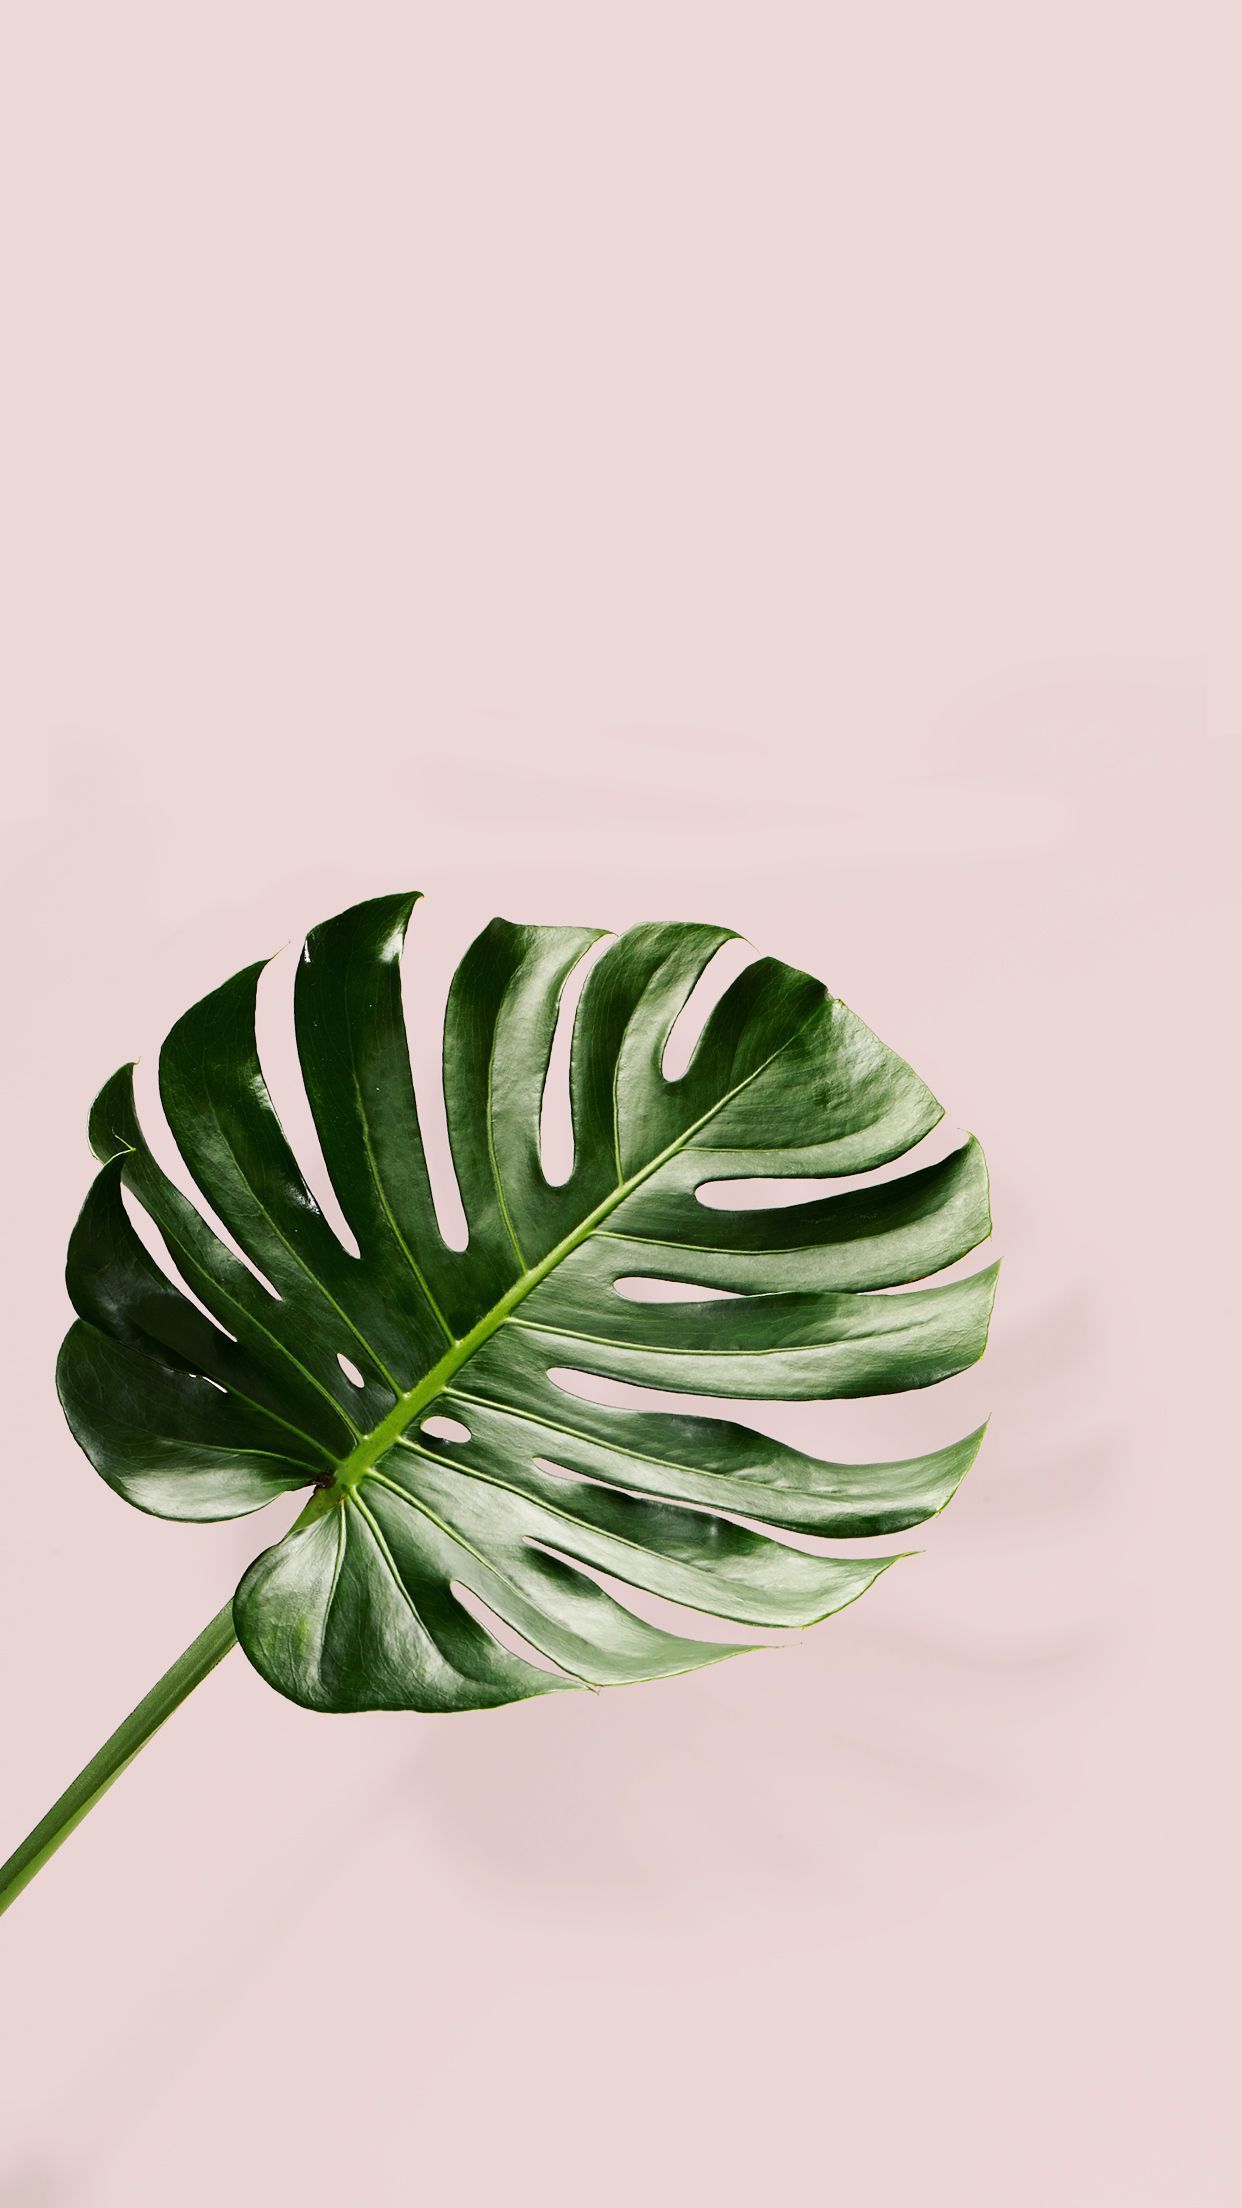 Weekend Creative. Pink & Green Inspiration. Plant wallpaper, Palm leaf wallpaper, Leaves wallpaper iphone